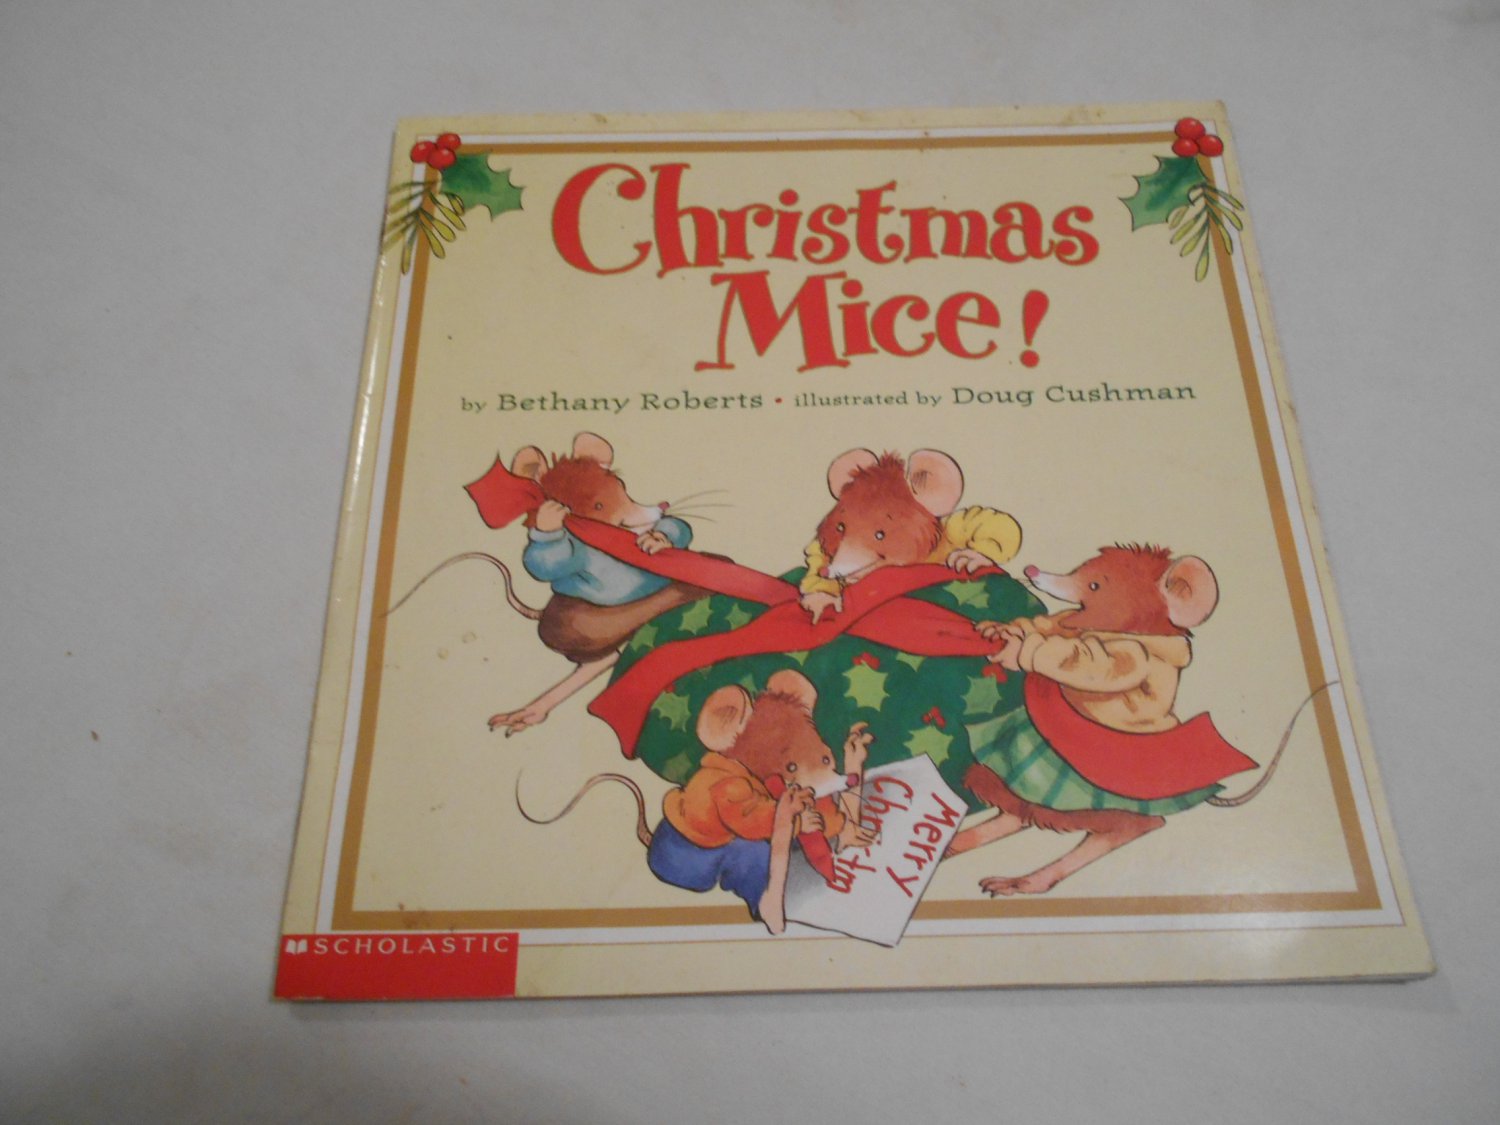 Christmas Mice! by Bethany Roberts (2001) (WC4) Scholastic, Holiday, Childrens